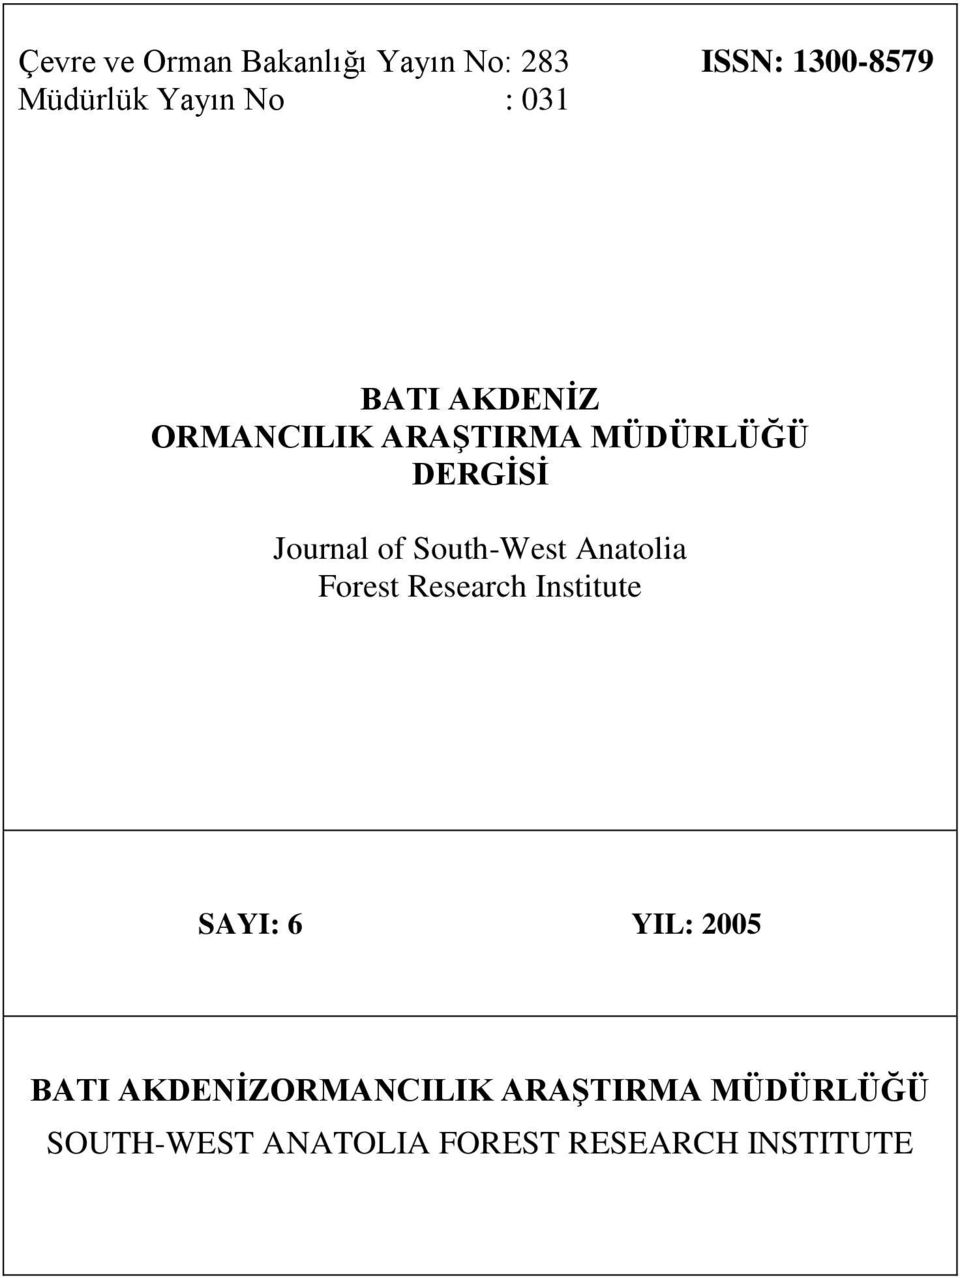 South-West Anatolia Forest Research Institute SAYI: 6 YIL: 2005 BATI